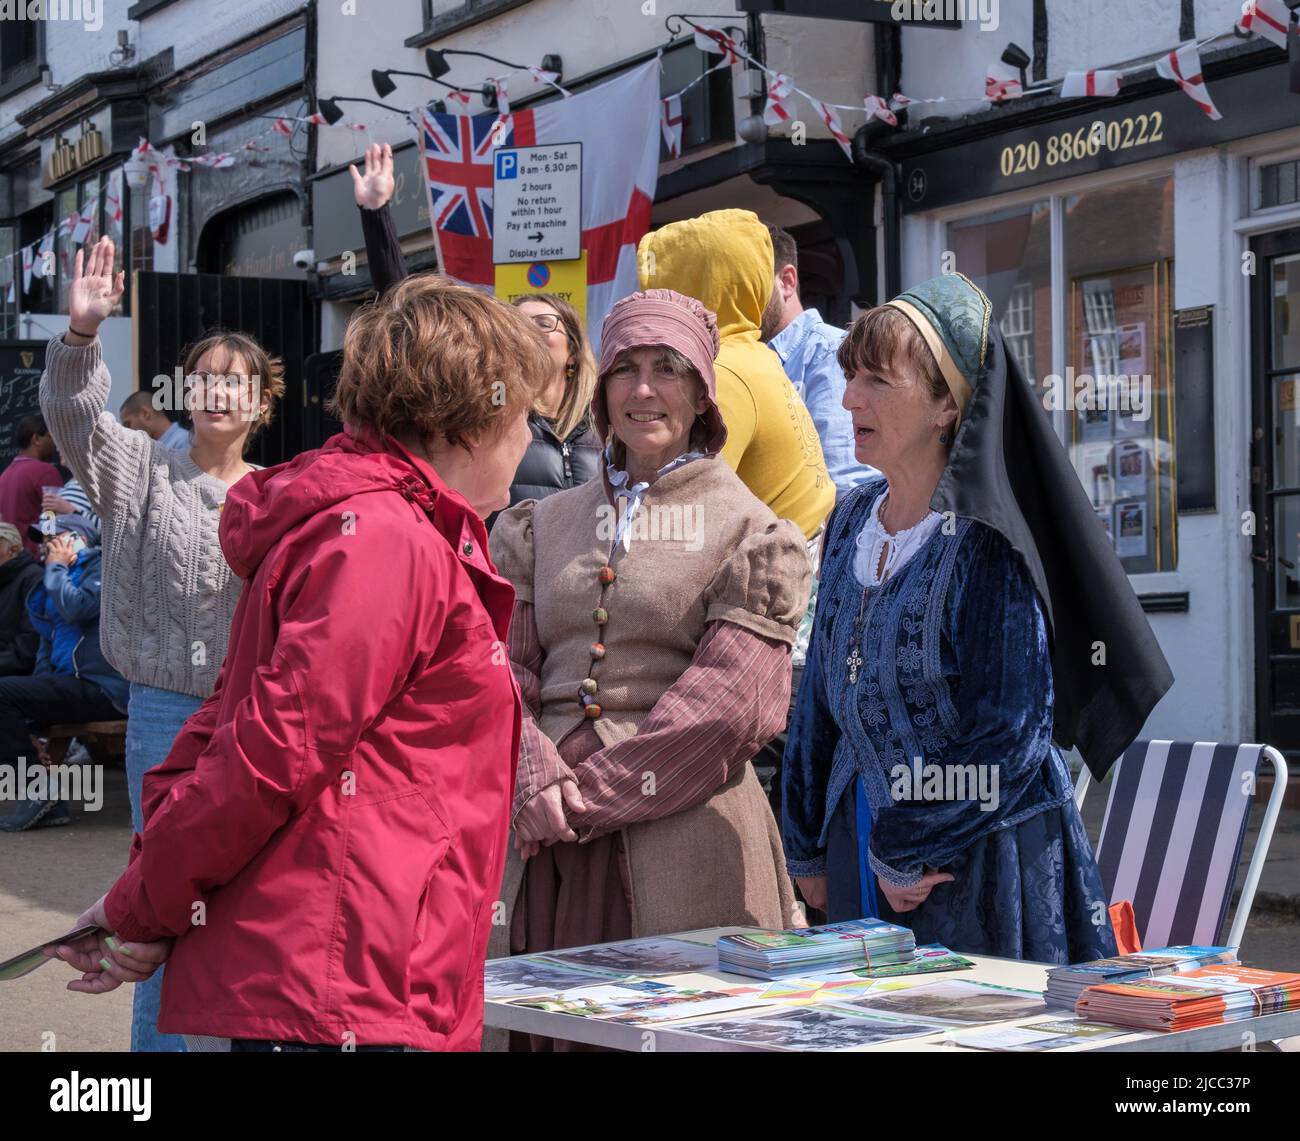 Two ladies in Tudor dress explain about Headstone Manor & Museum next to a table with leaflets at St George’s Day Celebration 2022, Pinner Harrow, UK. Stock Photo